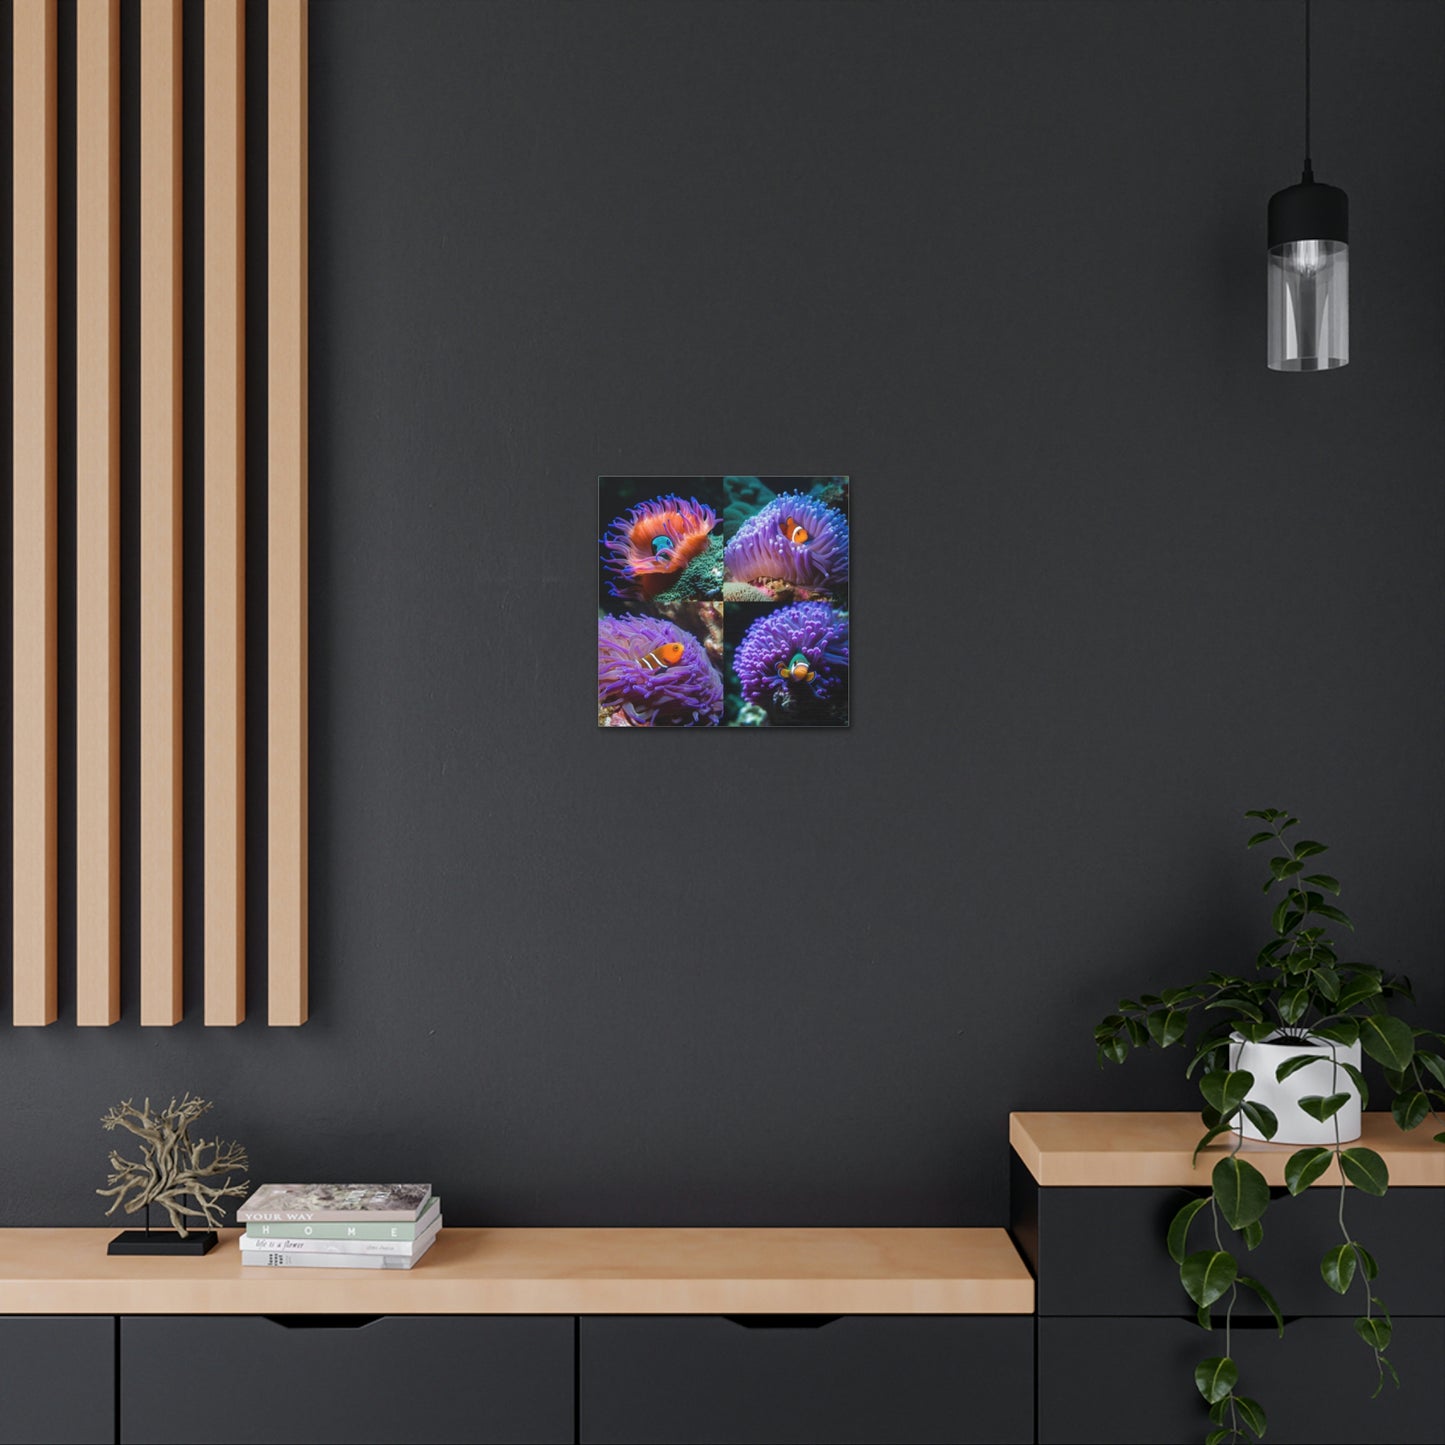 Canvas Gallery Wraps Anemone Clown 4 Pack